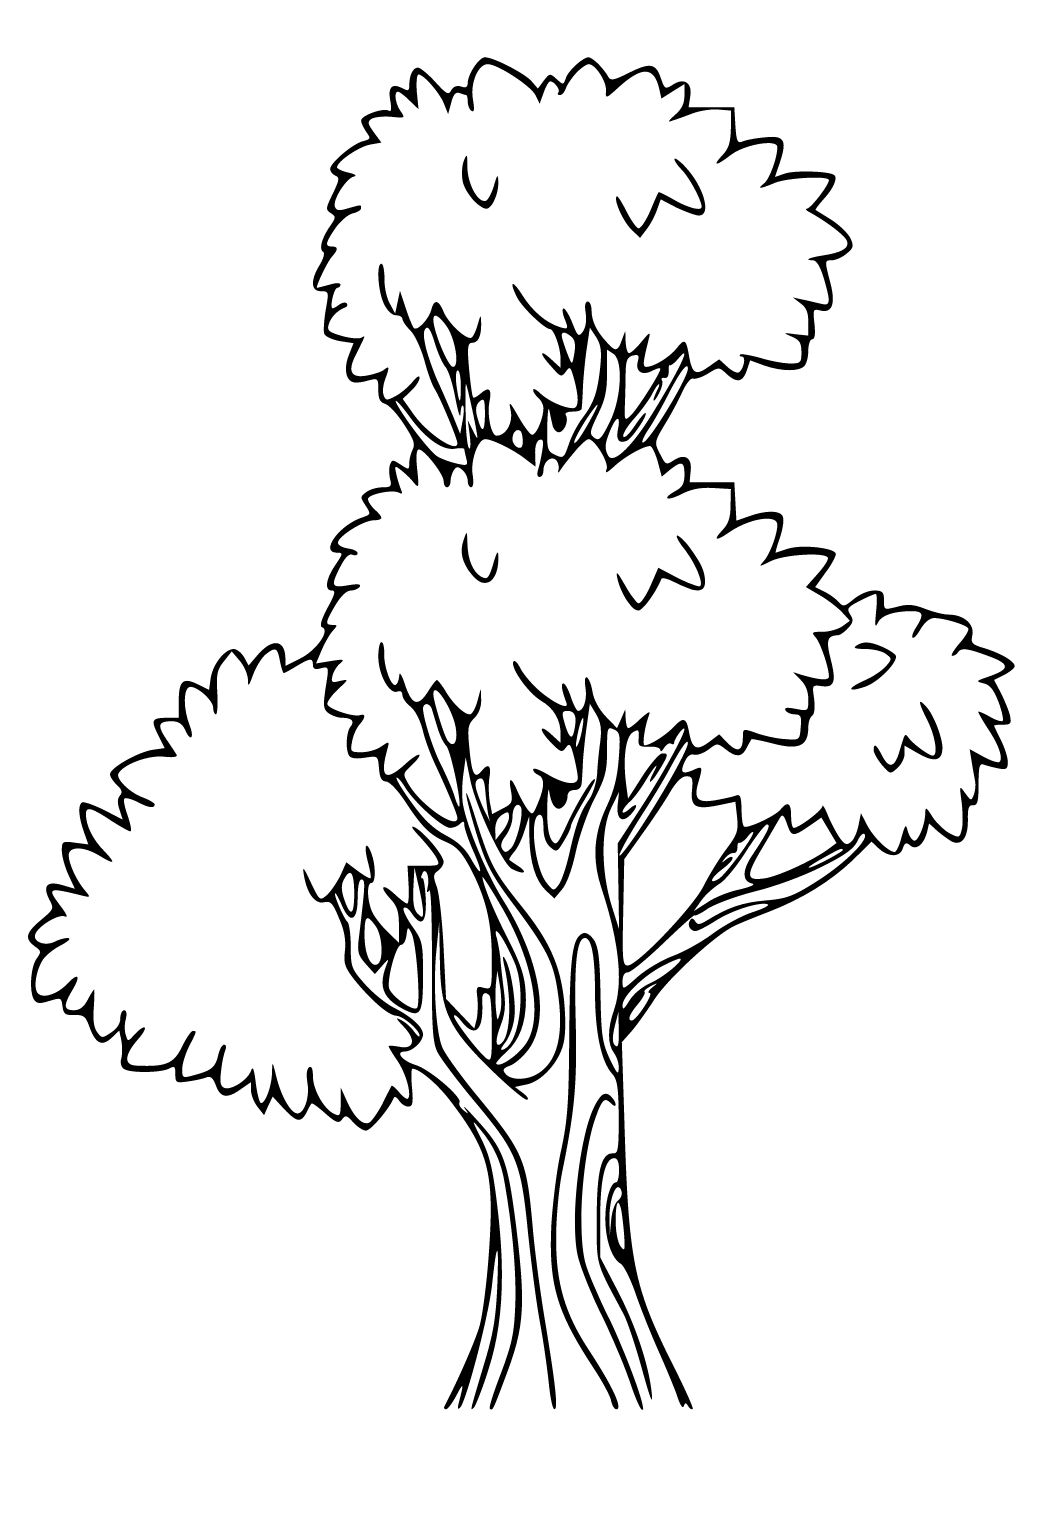 Free Printable Tree Branches Coloring Page, Sheet and Picture for Adults  and Kids (Girls and Boys) - Babeled.com